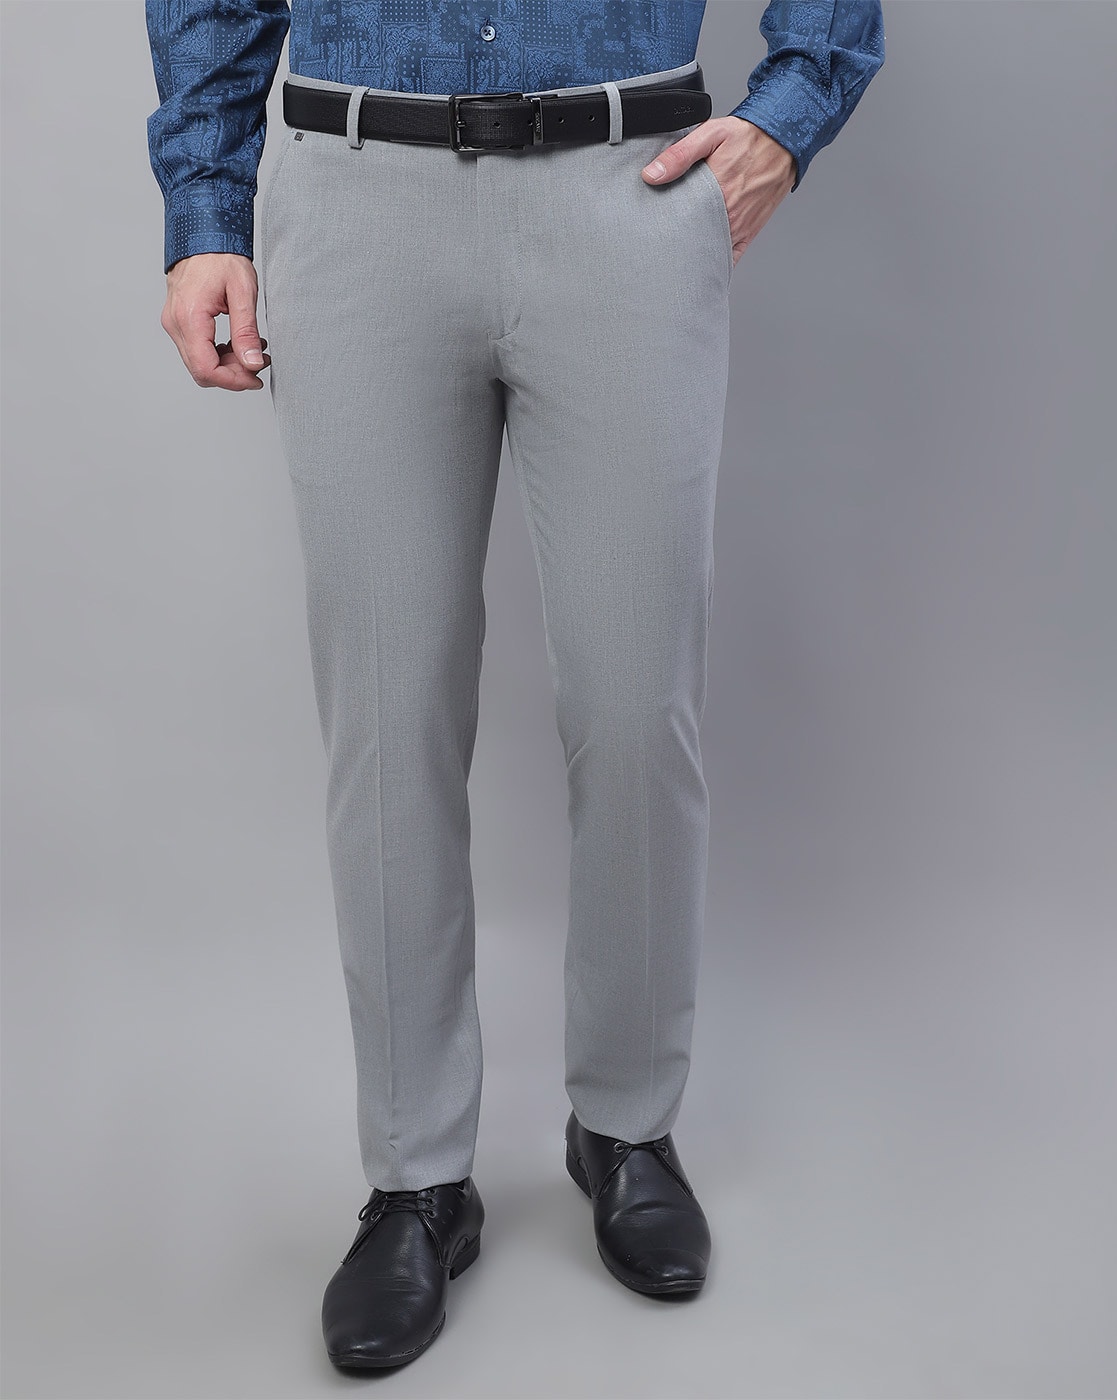 Cantabil Mens Trousers, Pattern : Plain, Occasion : Formal Wear at Rs 1,500  / Piece in Bangalore